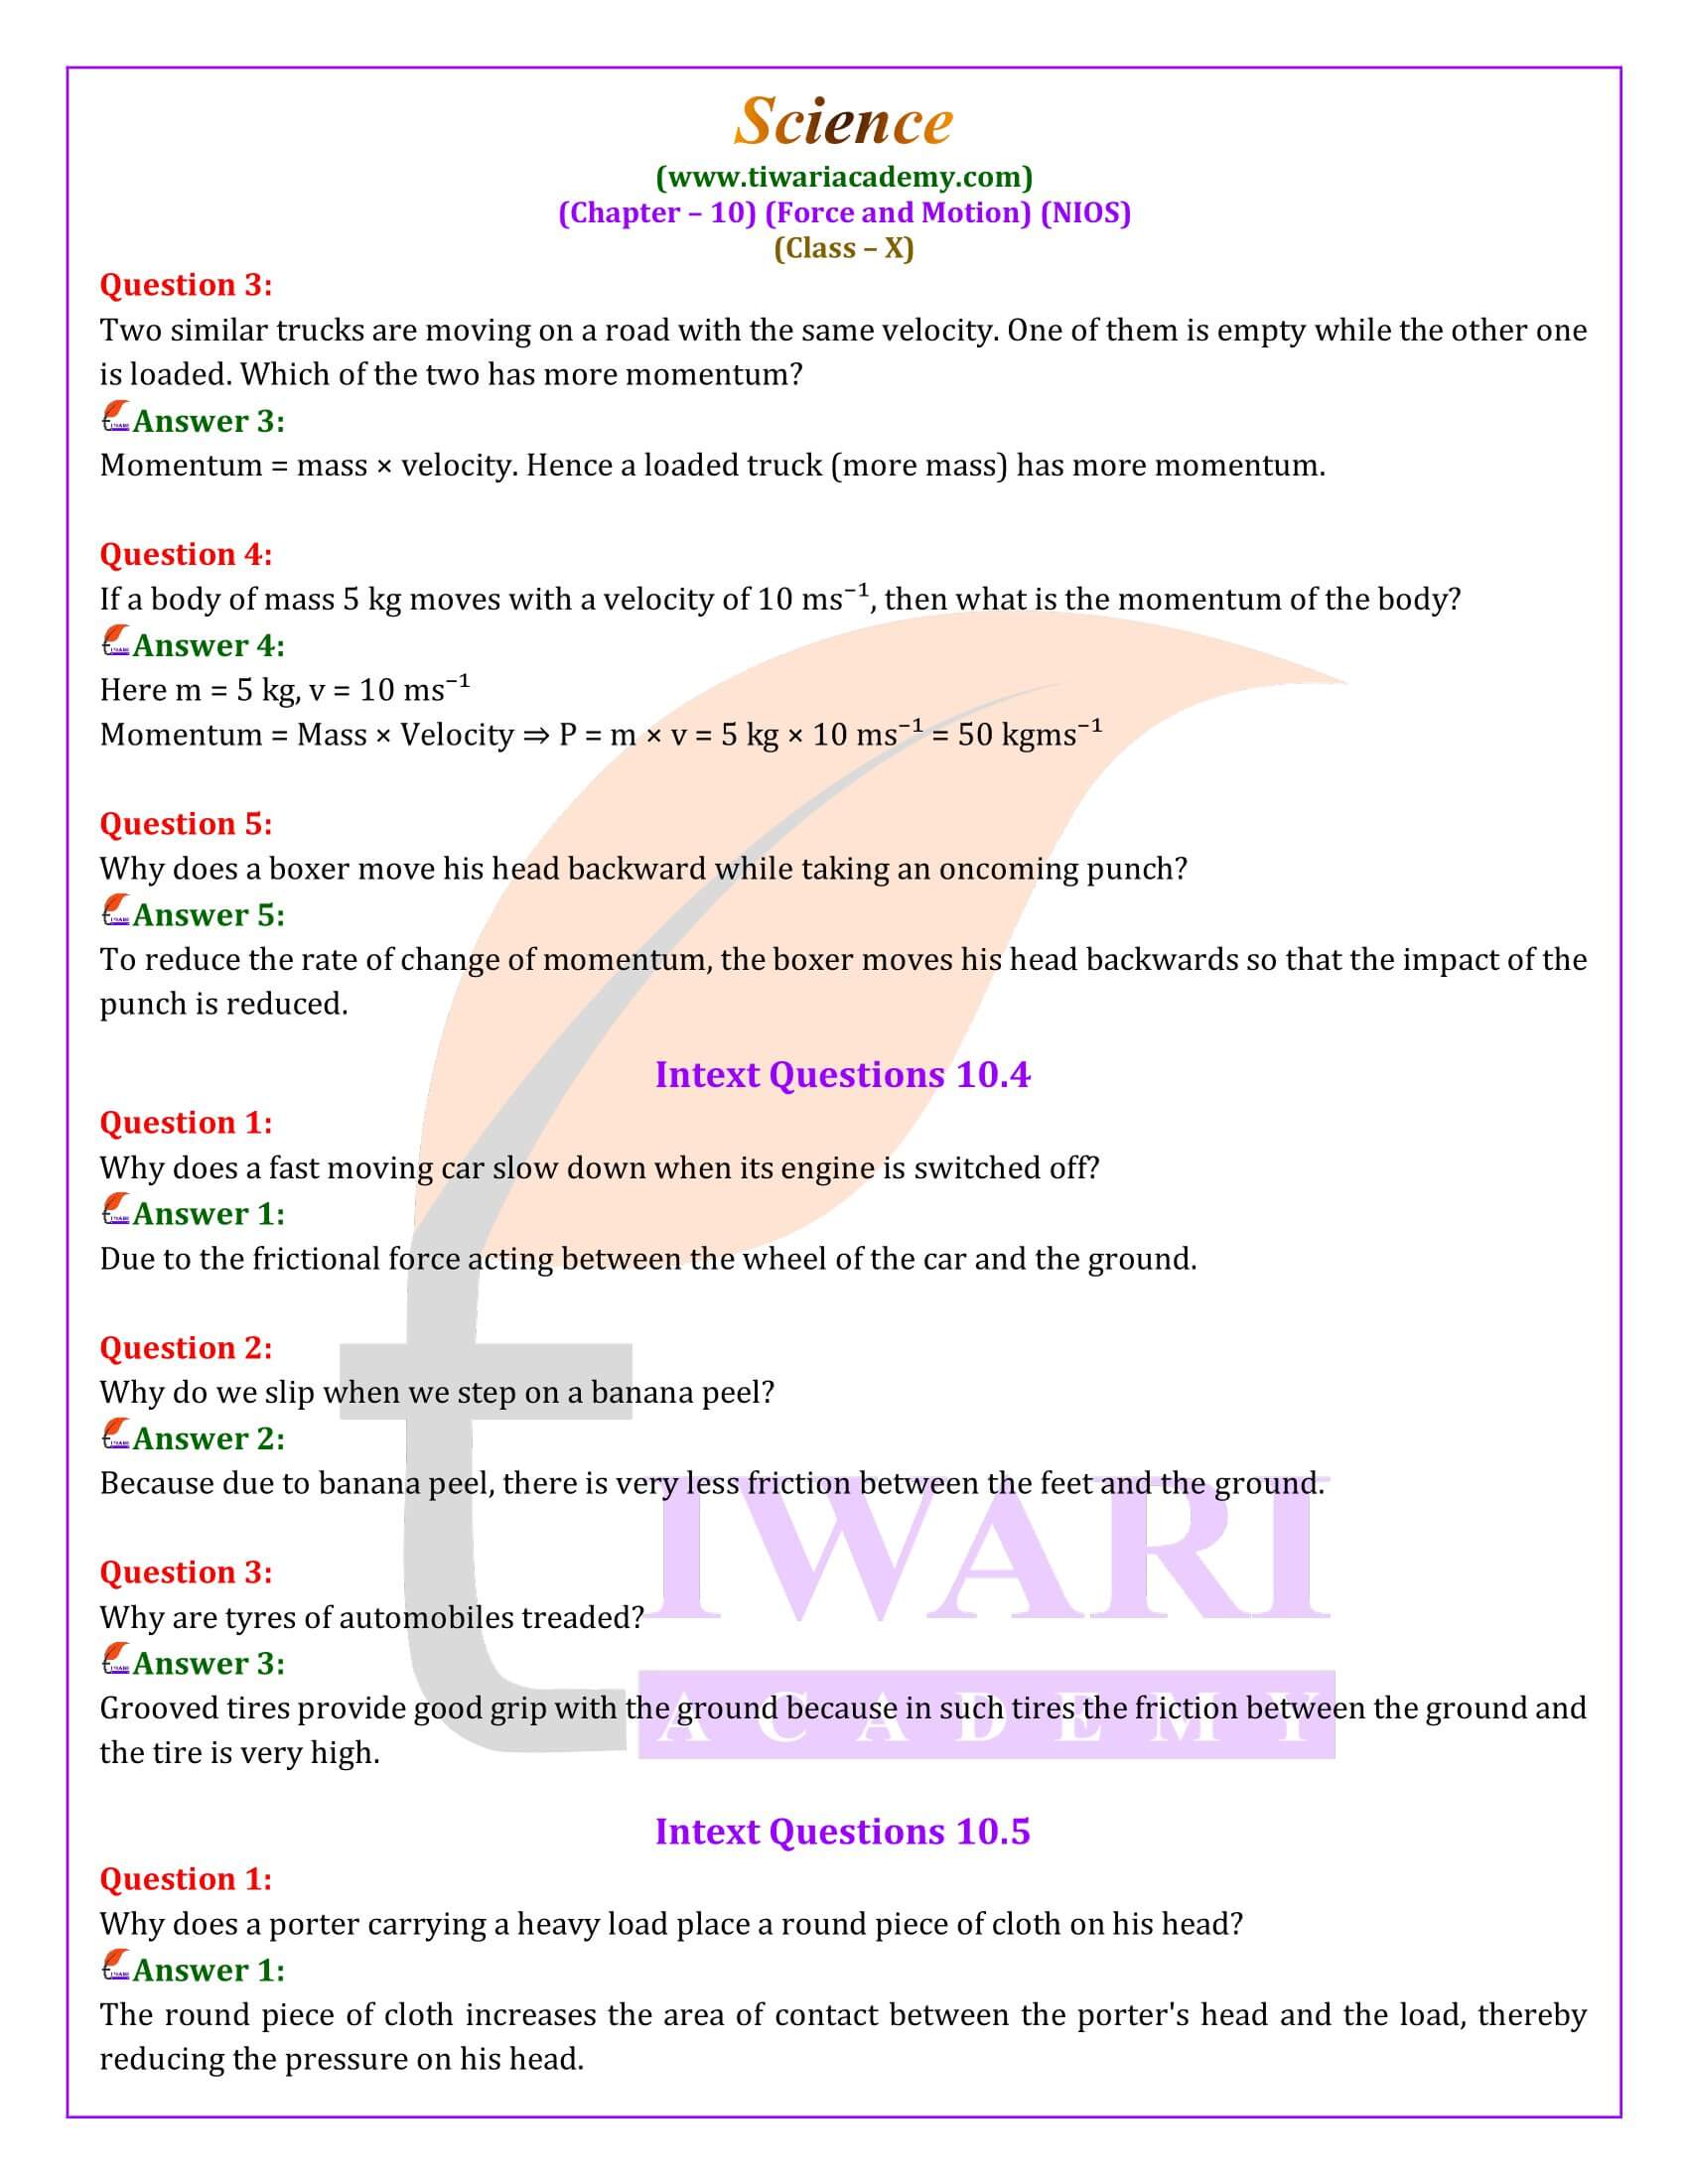 NIOS Class 10 Science Chapter 10 Force and Motion Question Answers